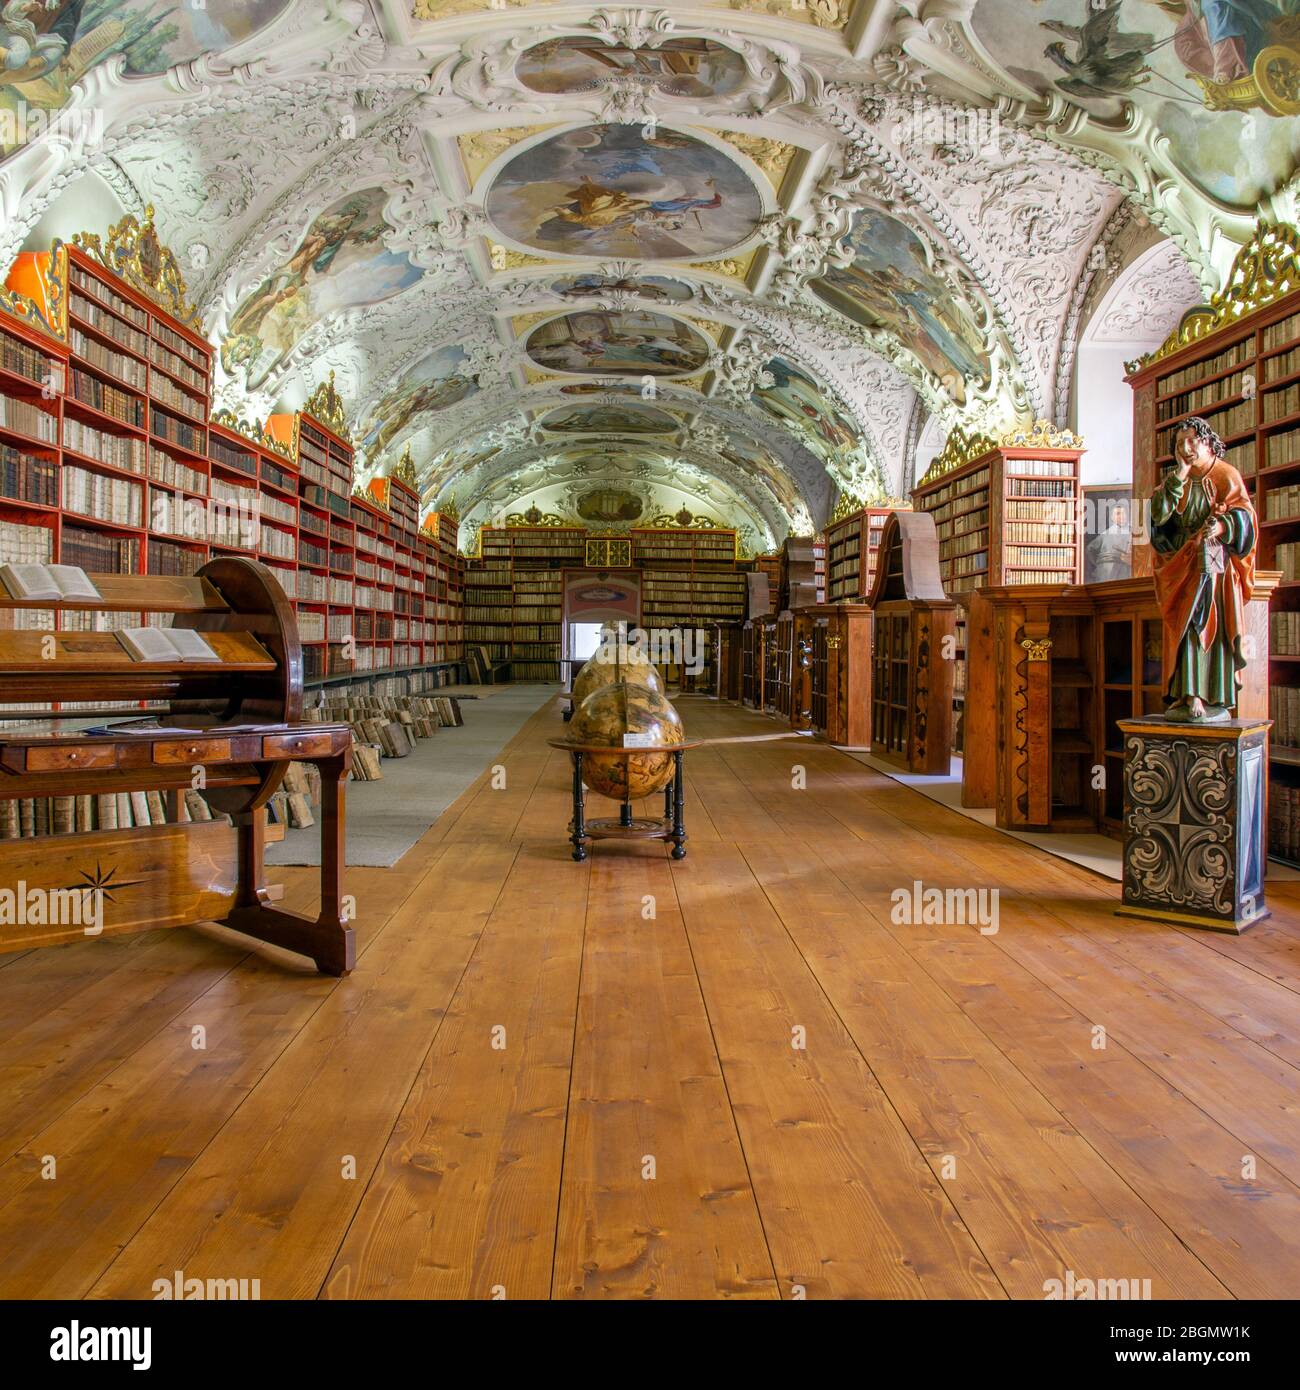 A view along the famous Reading Room in the Strahov Library, Prague. Ancient tomes line the walls under the ornately detailed ceiling. Stock Photo